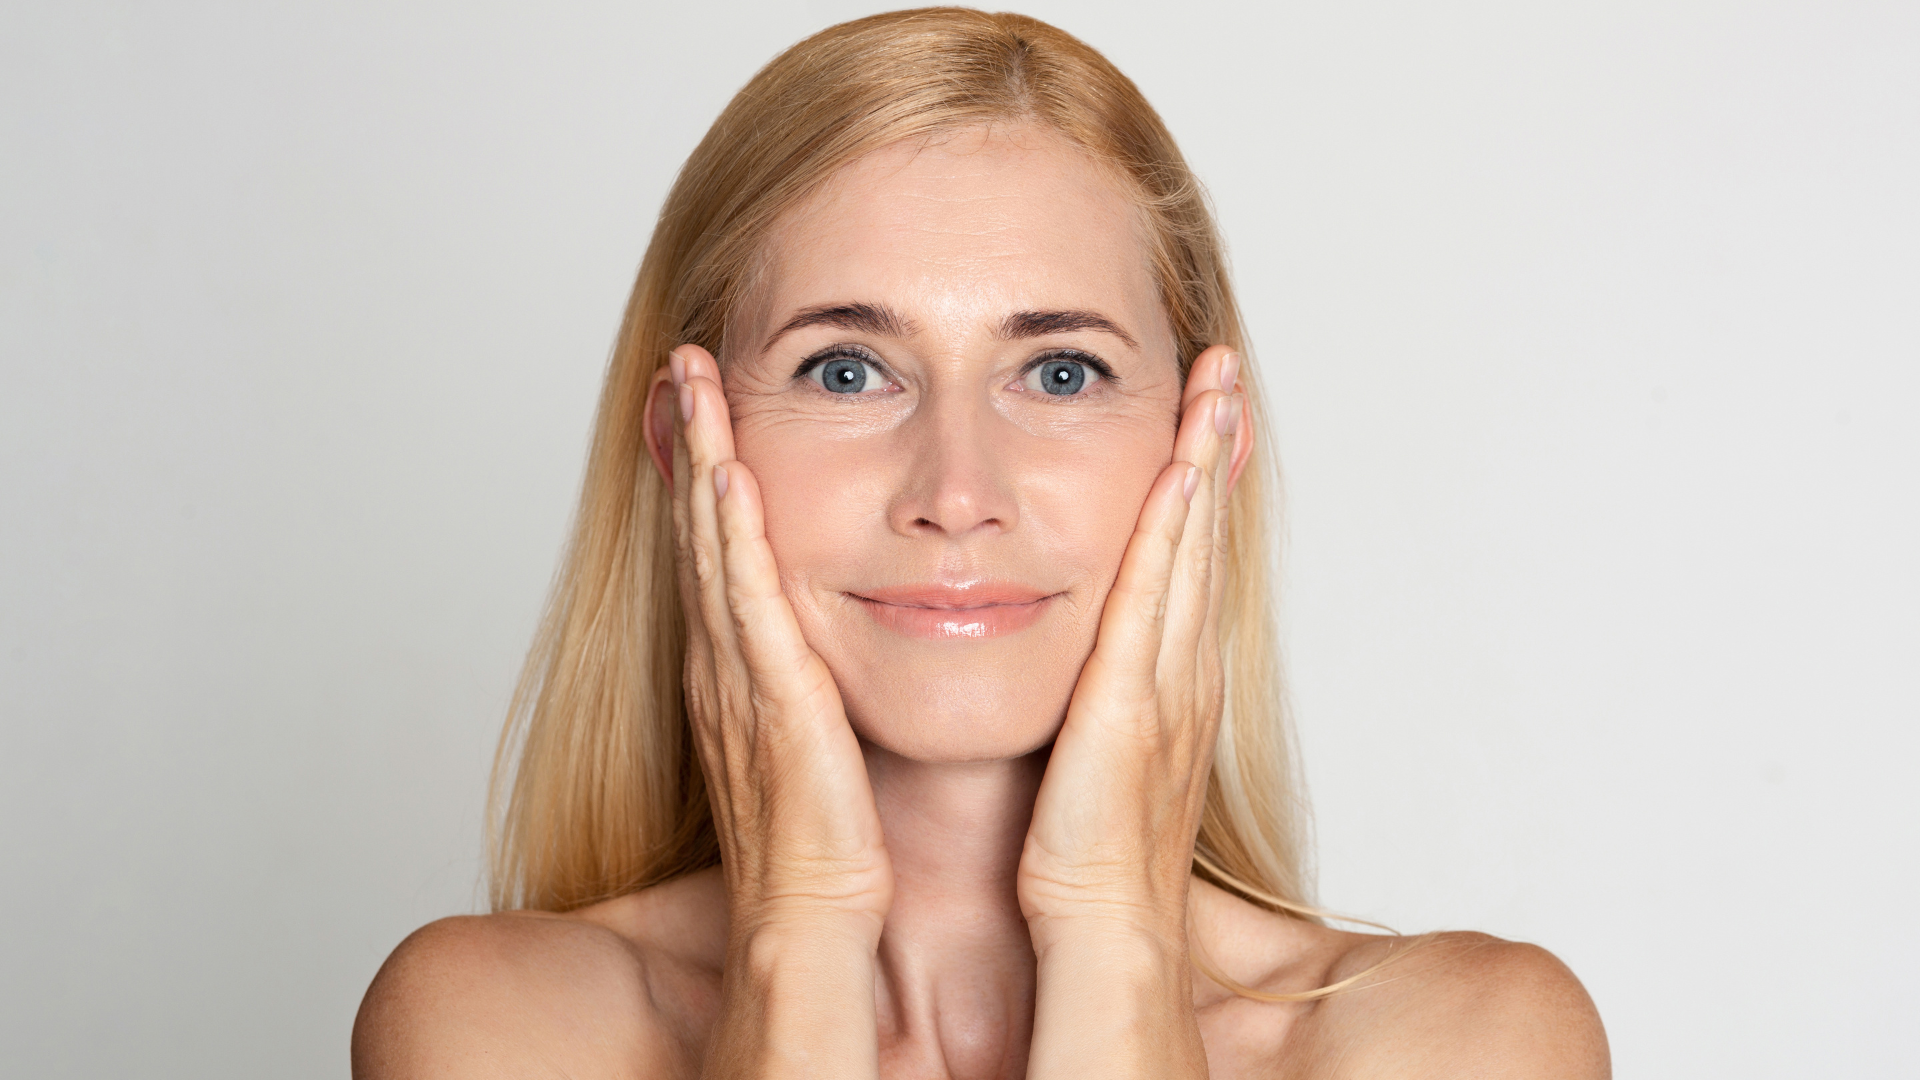 Juvederm vs. Restylane: Which Injectable Filler Is Right for You?